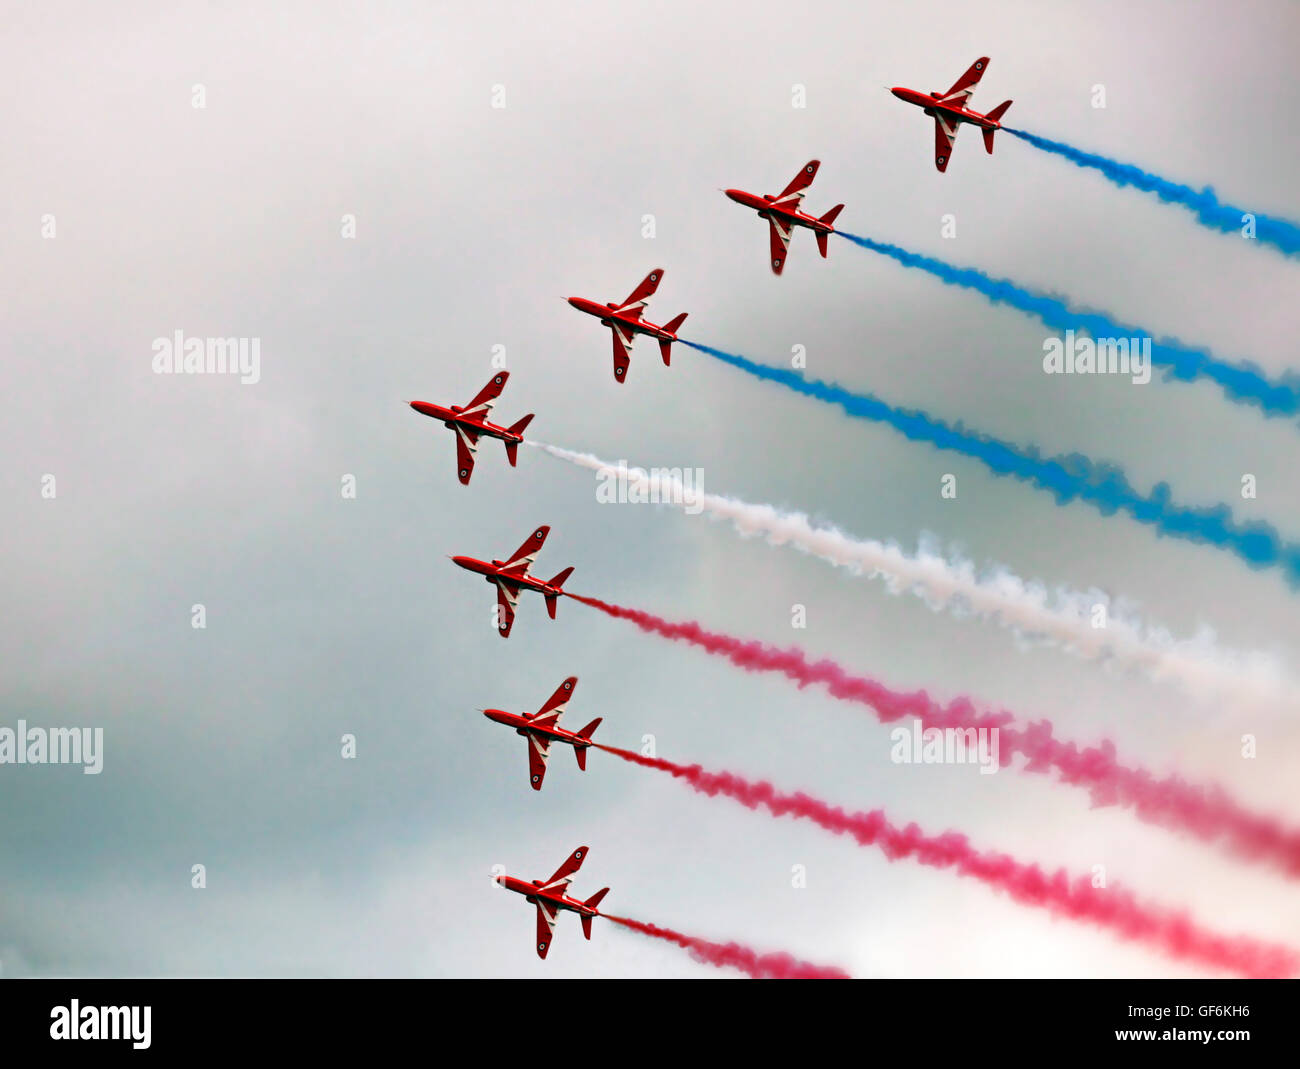 The Red Arrows aerobatic team perform at the Bray Air Display Ireland 2016 Stock Photo